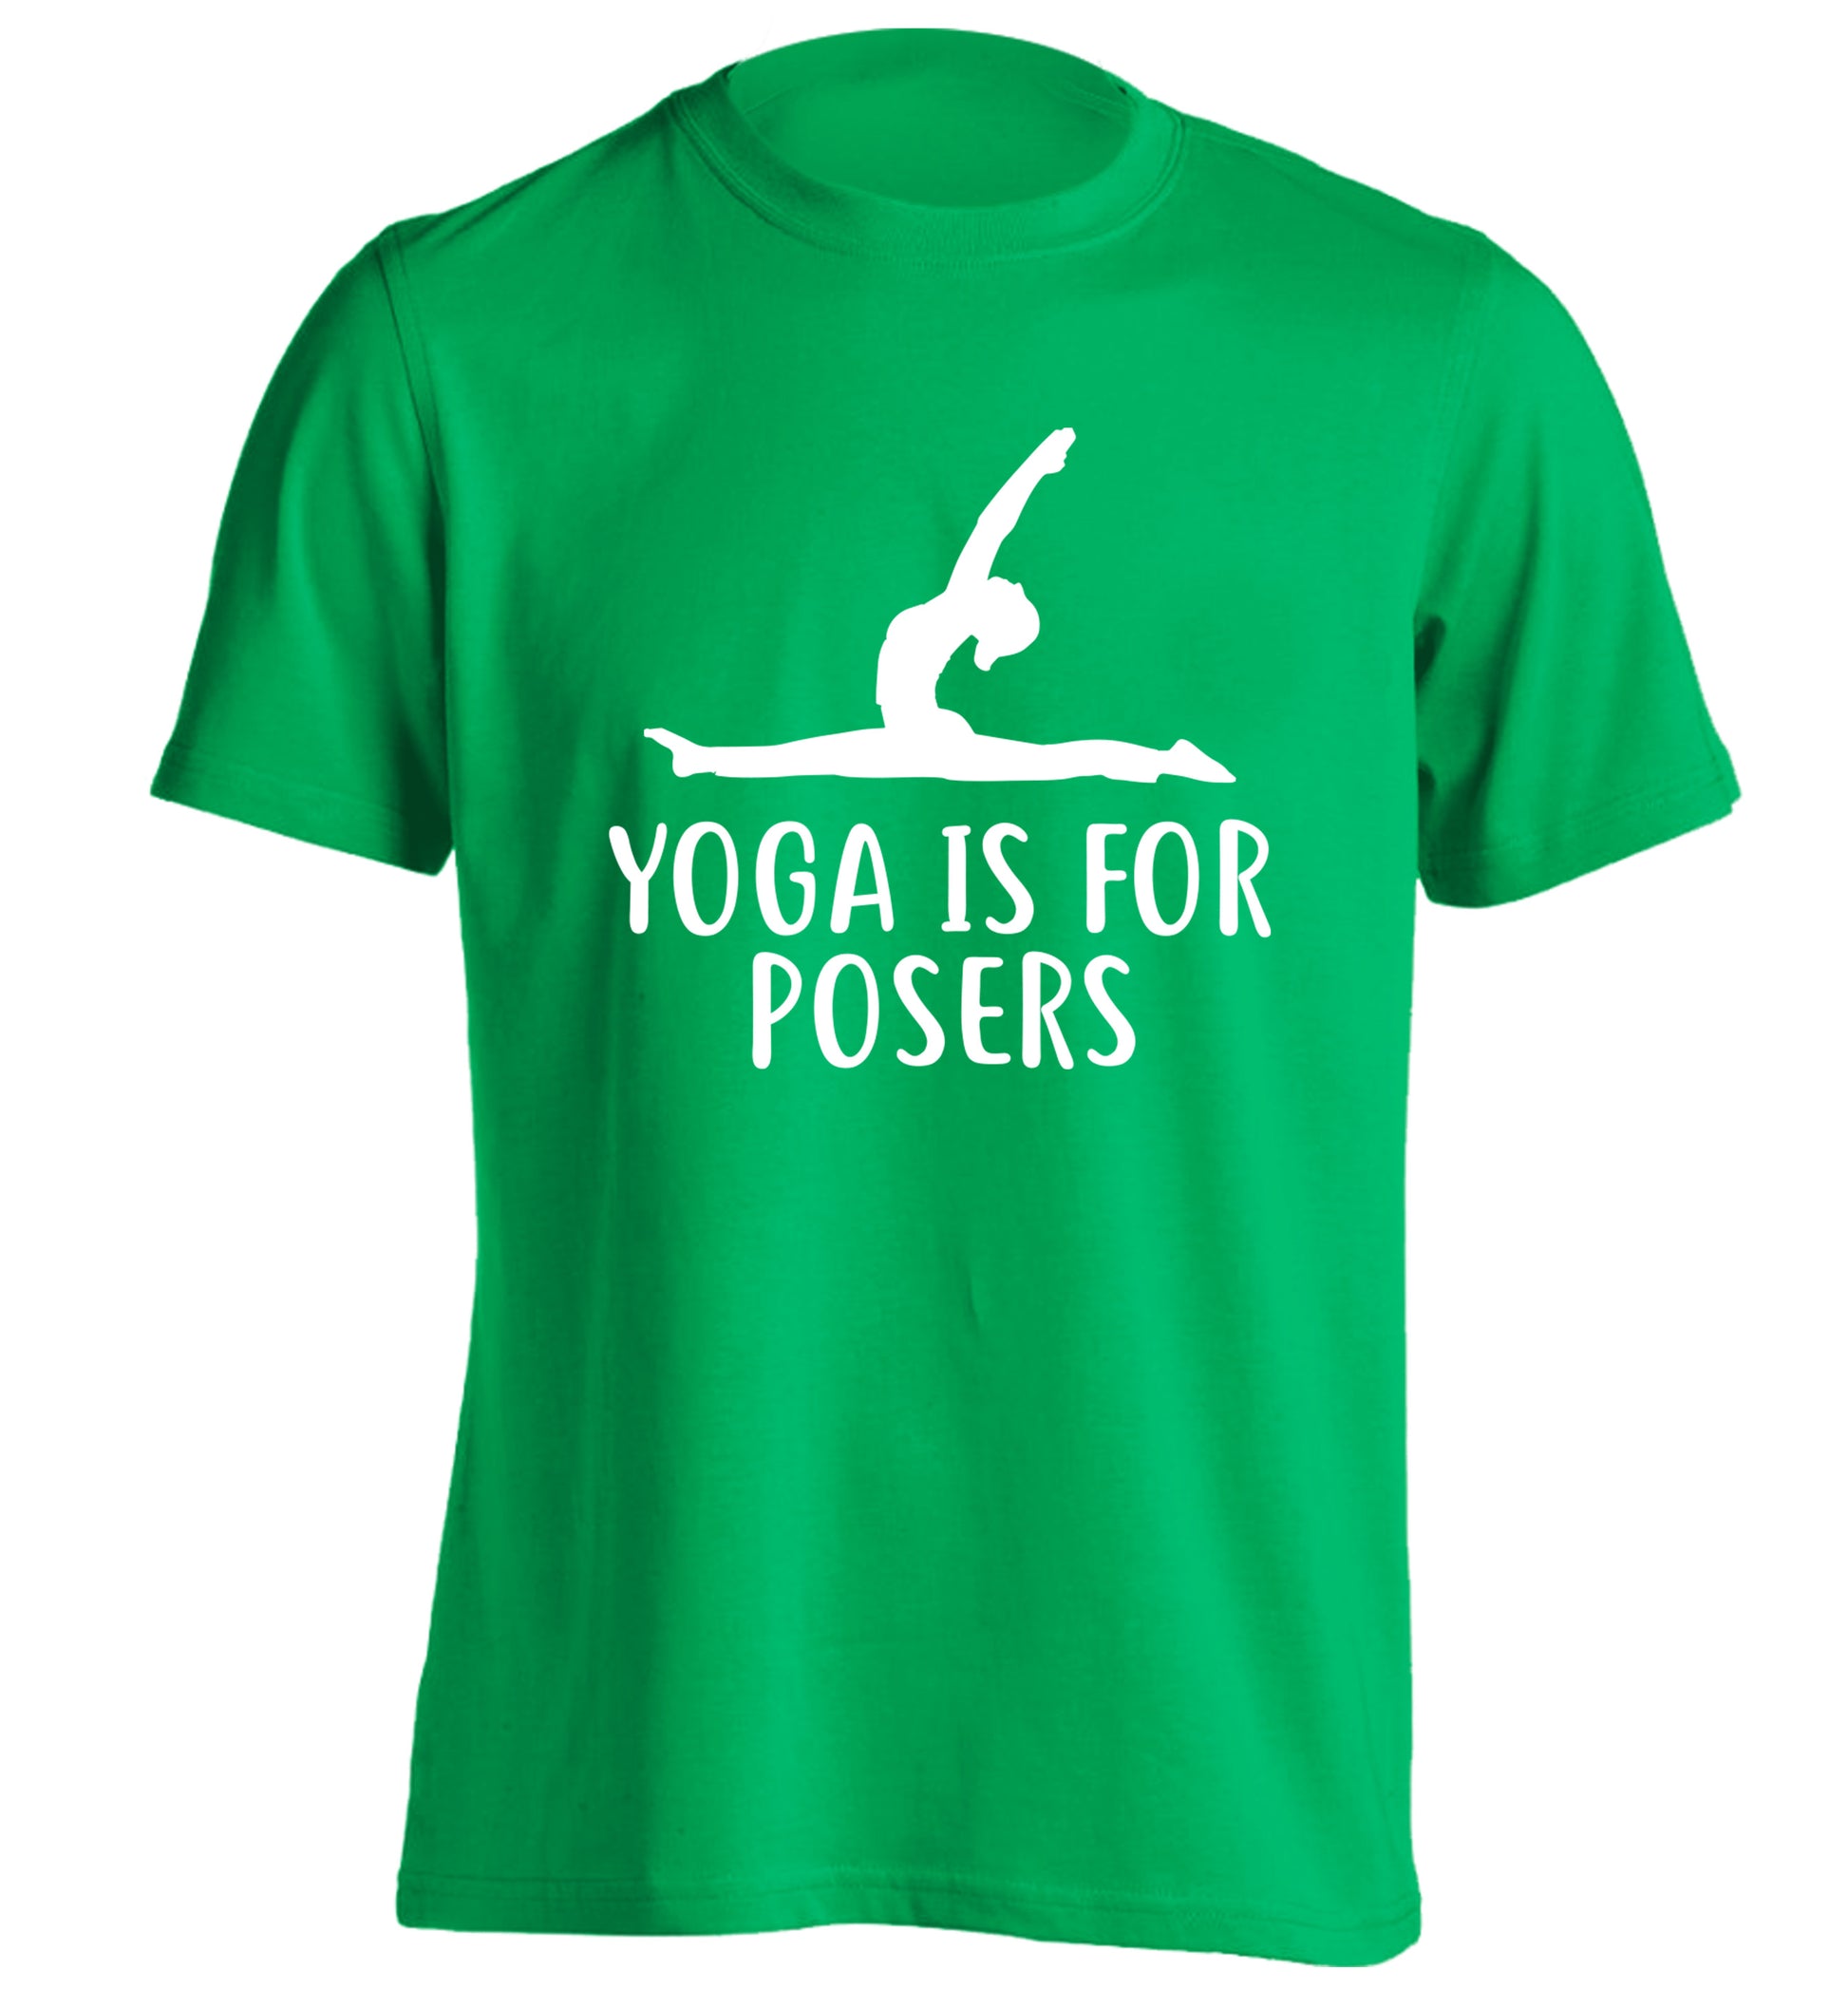 Yoga is for posers adults unisex green Tshirt 2XL